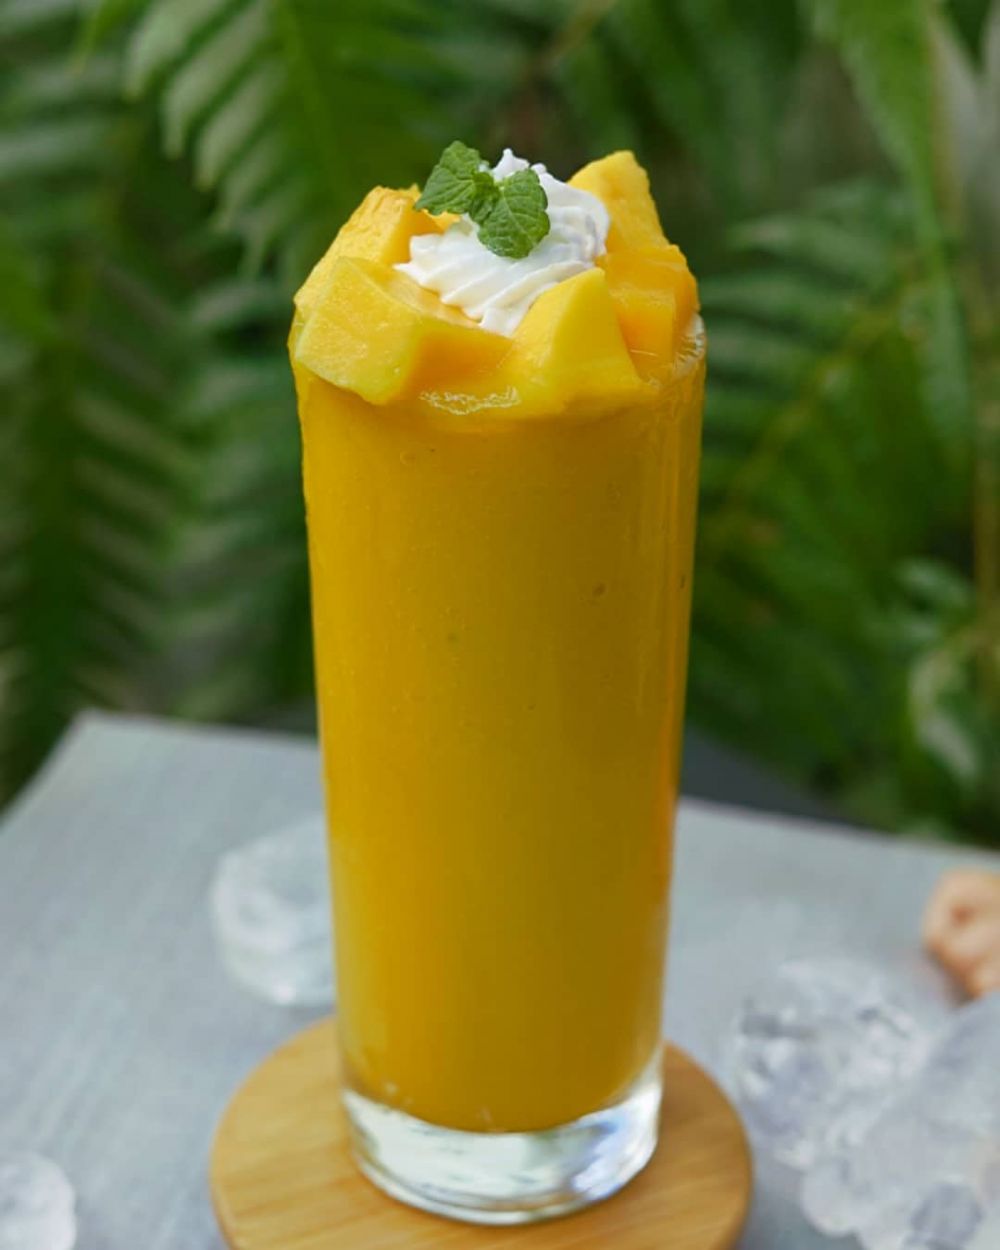 Recipe and how to make Thai mango, simple and can be a selling idea